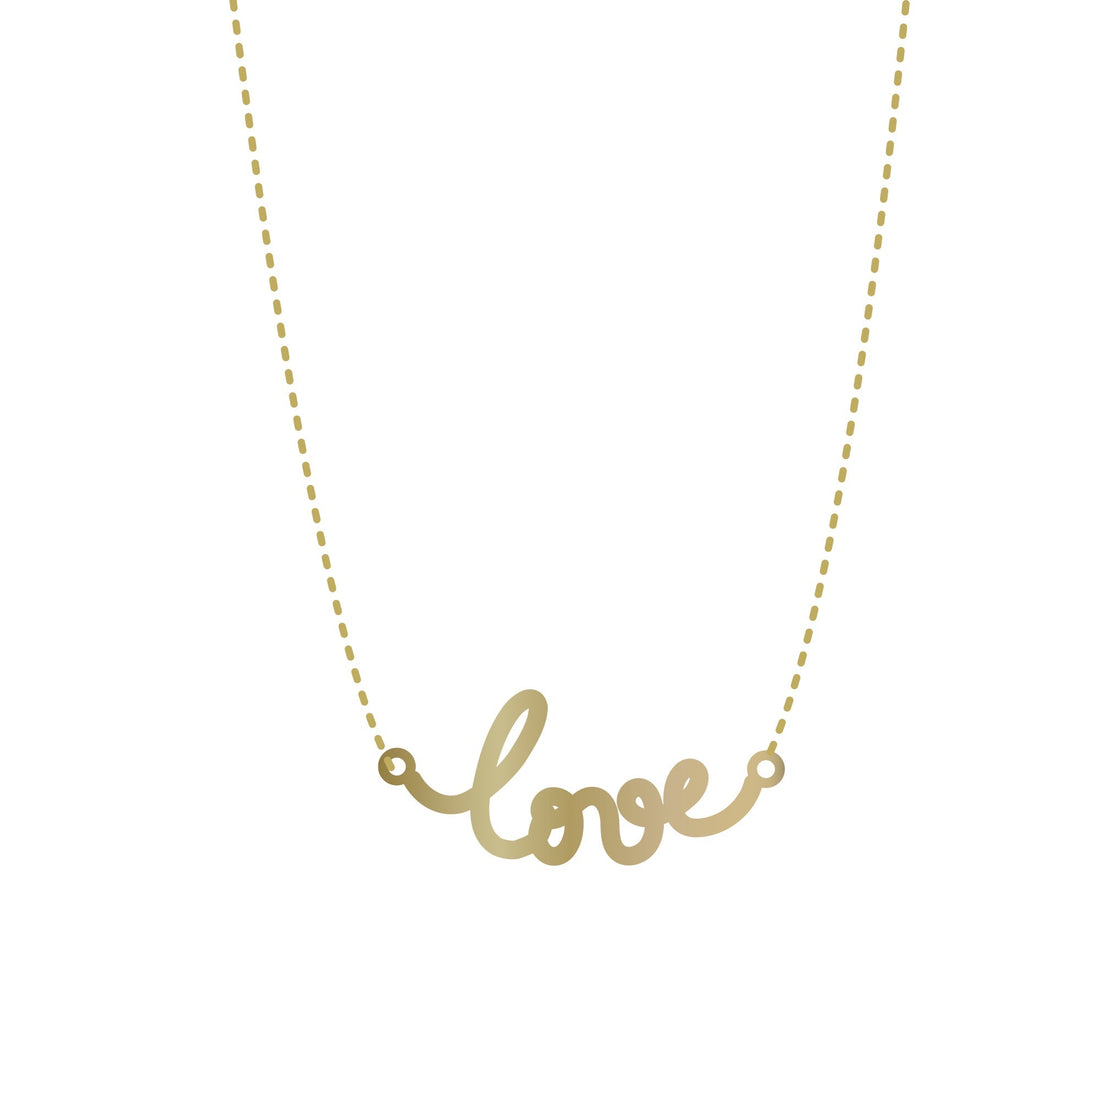 titlee accessories OS titlee Love Necklace